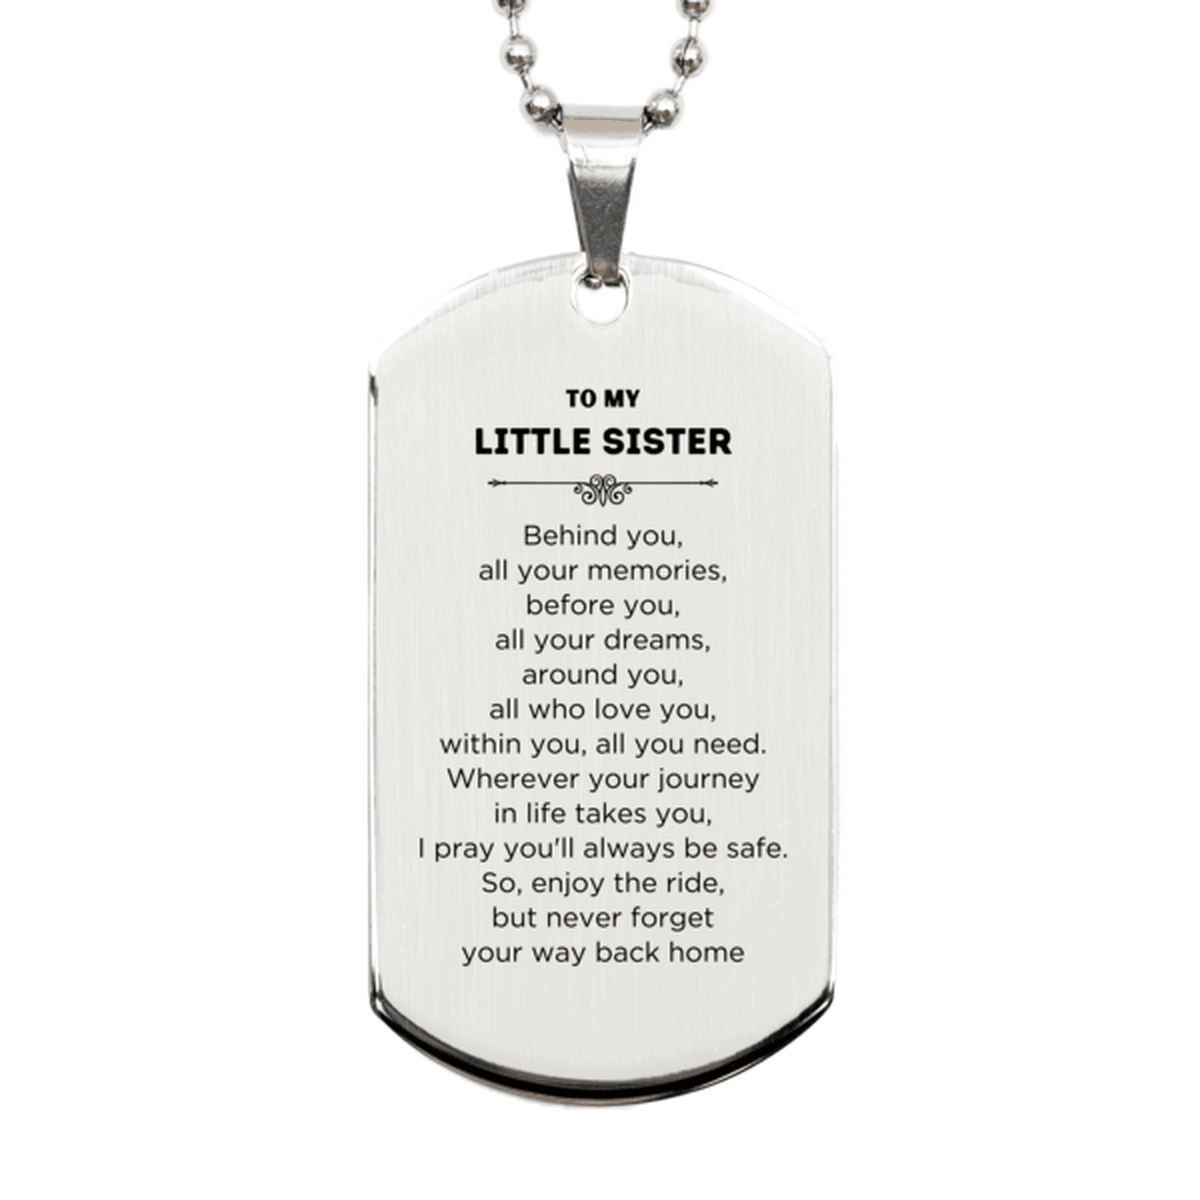 Little Sister Silver Dog Tag Necklace Birthday Christmas Unique Gifts Behind you, all your memories, before you, all your dreams - Mallard Moon Gift Shop